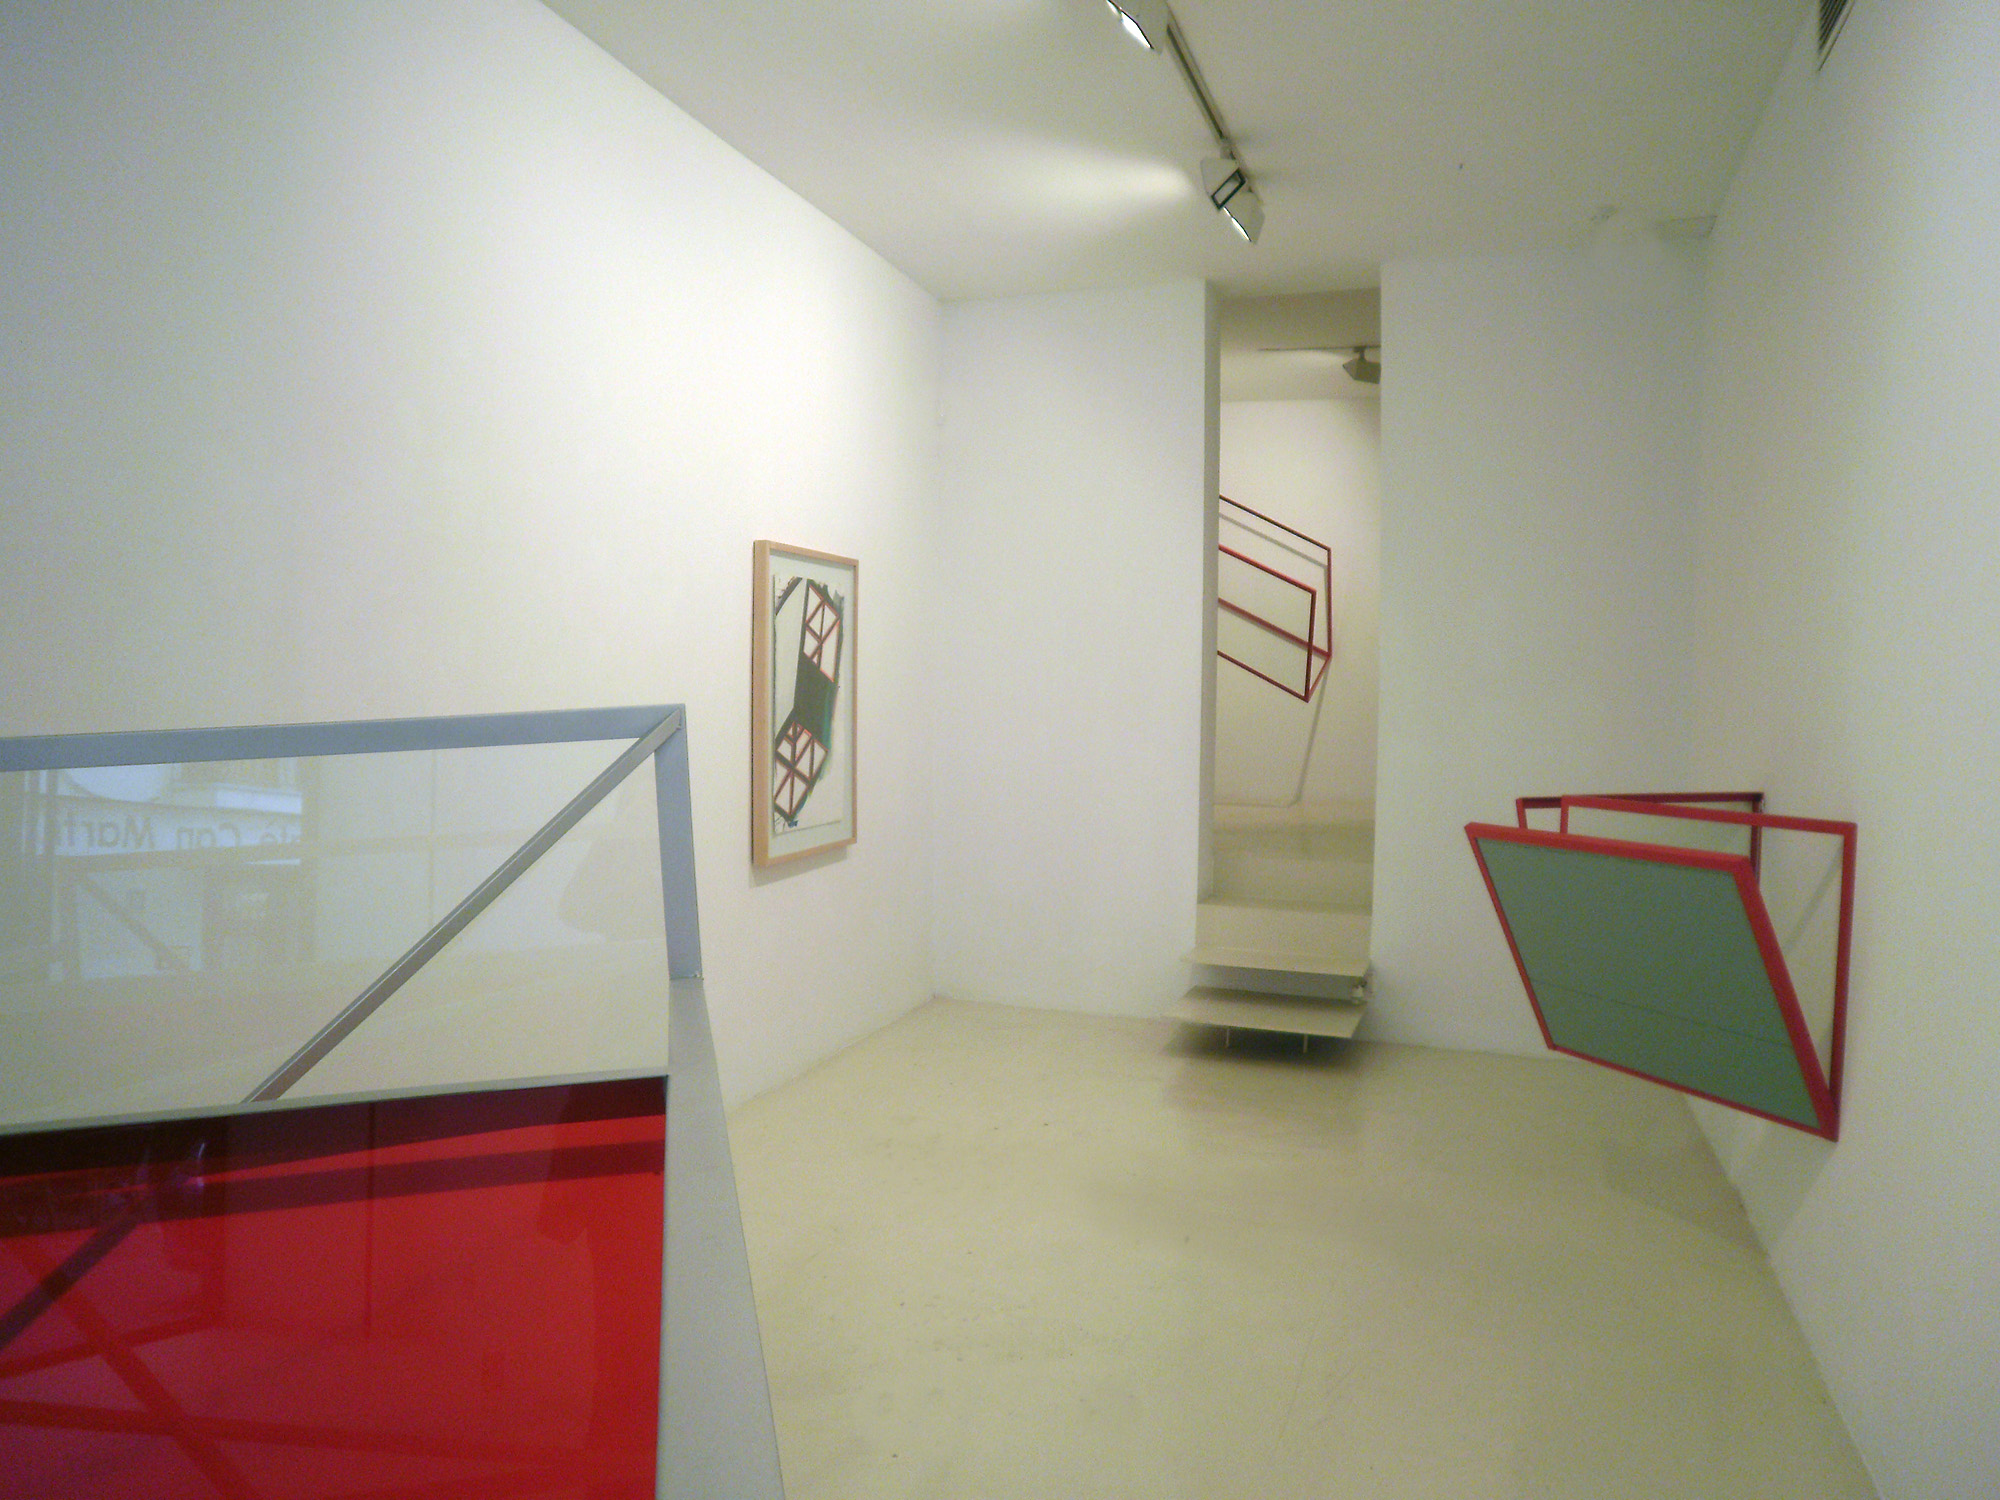 Exhibition view from Jose Pedro Croft, 2010